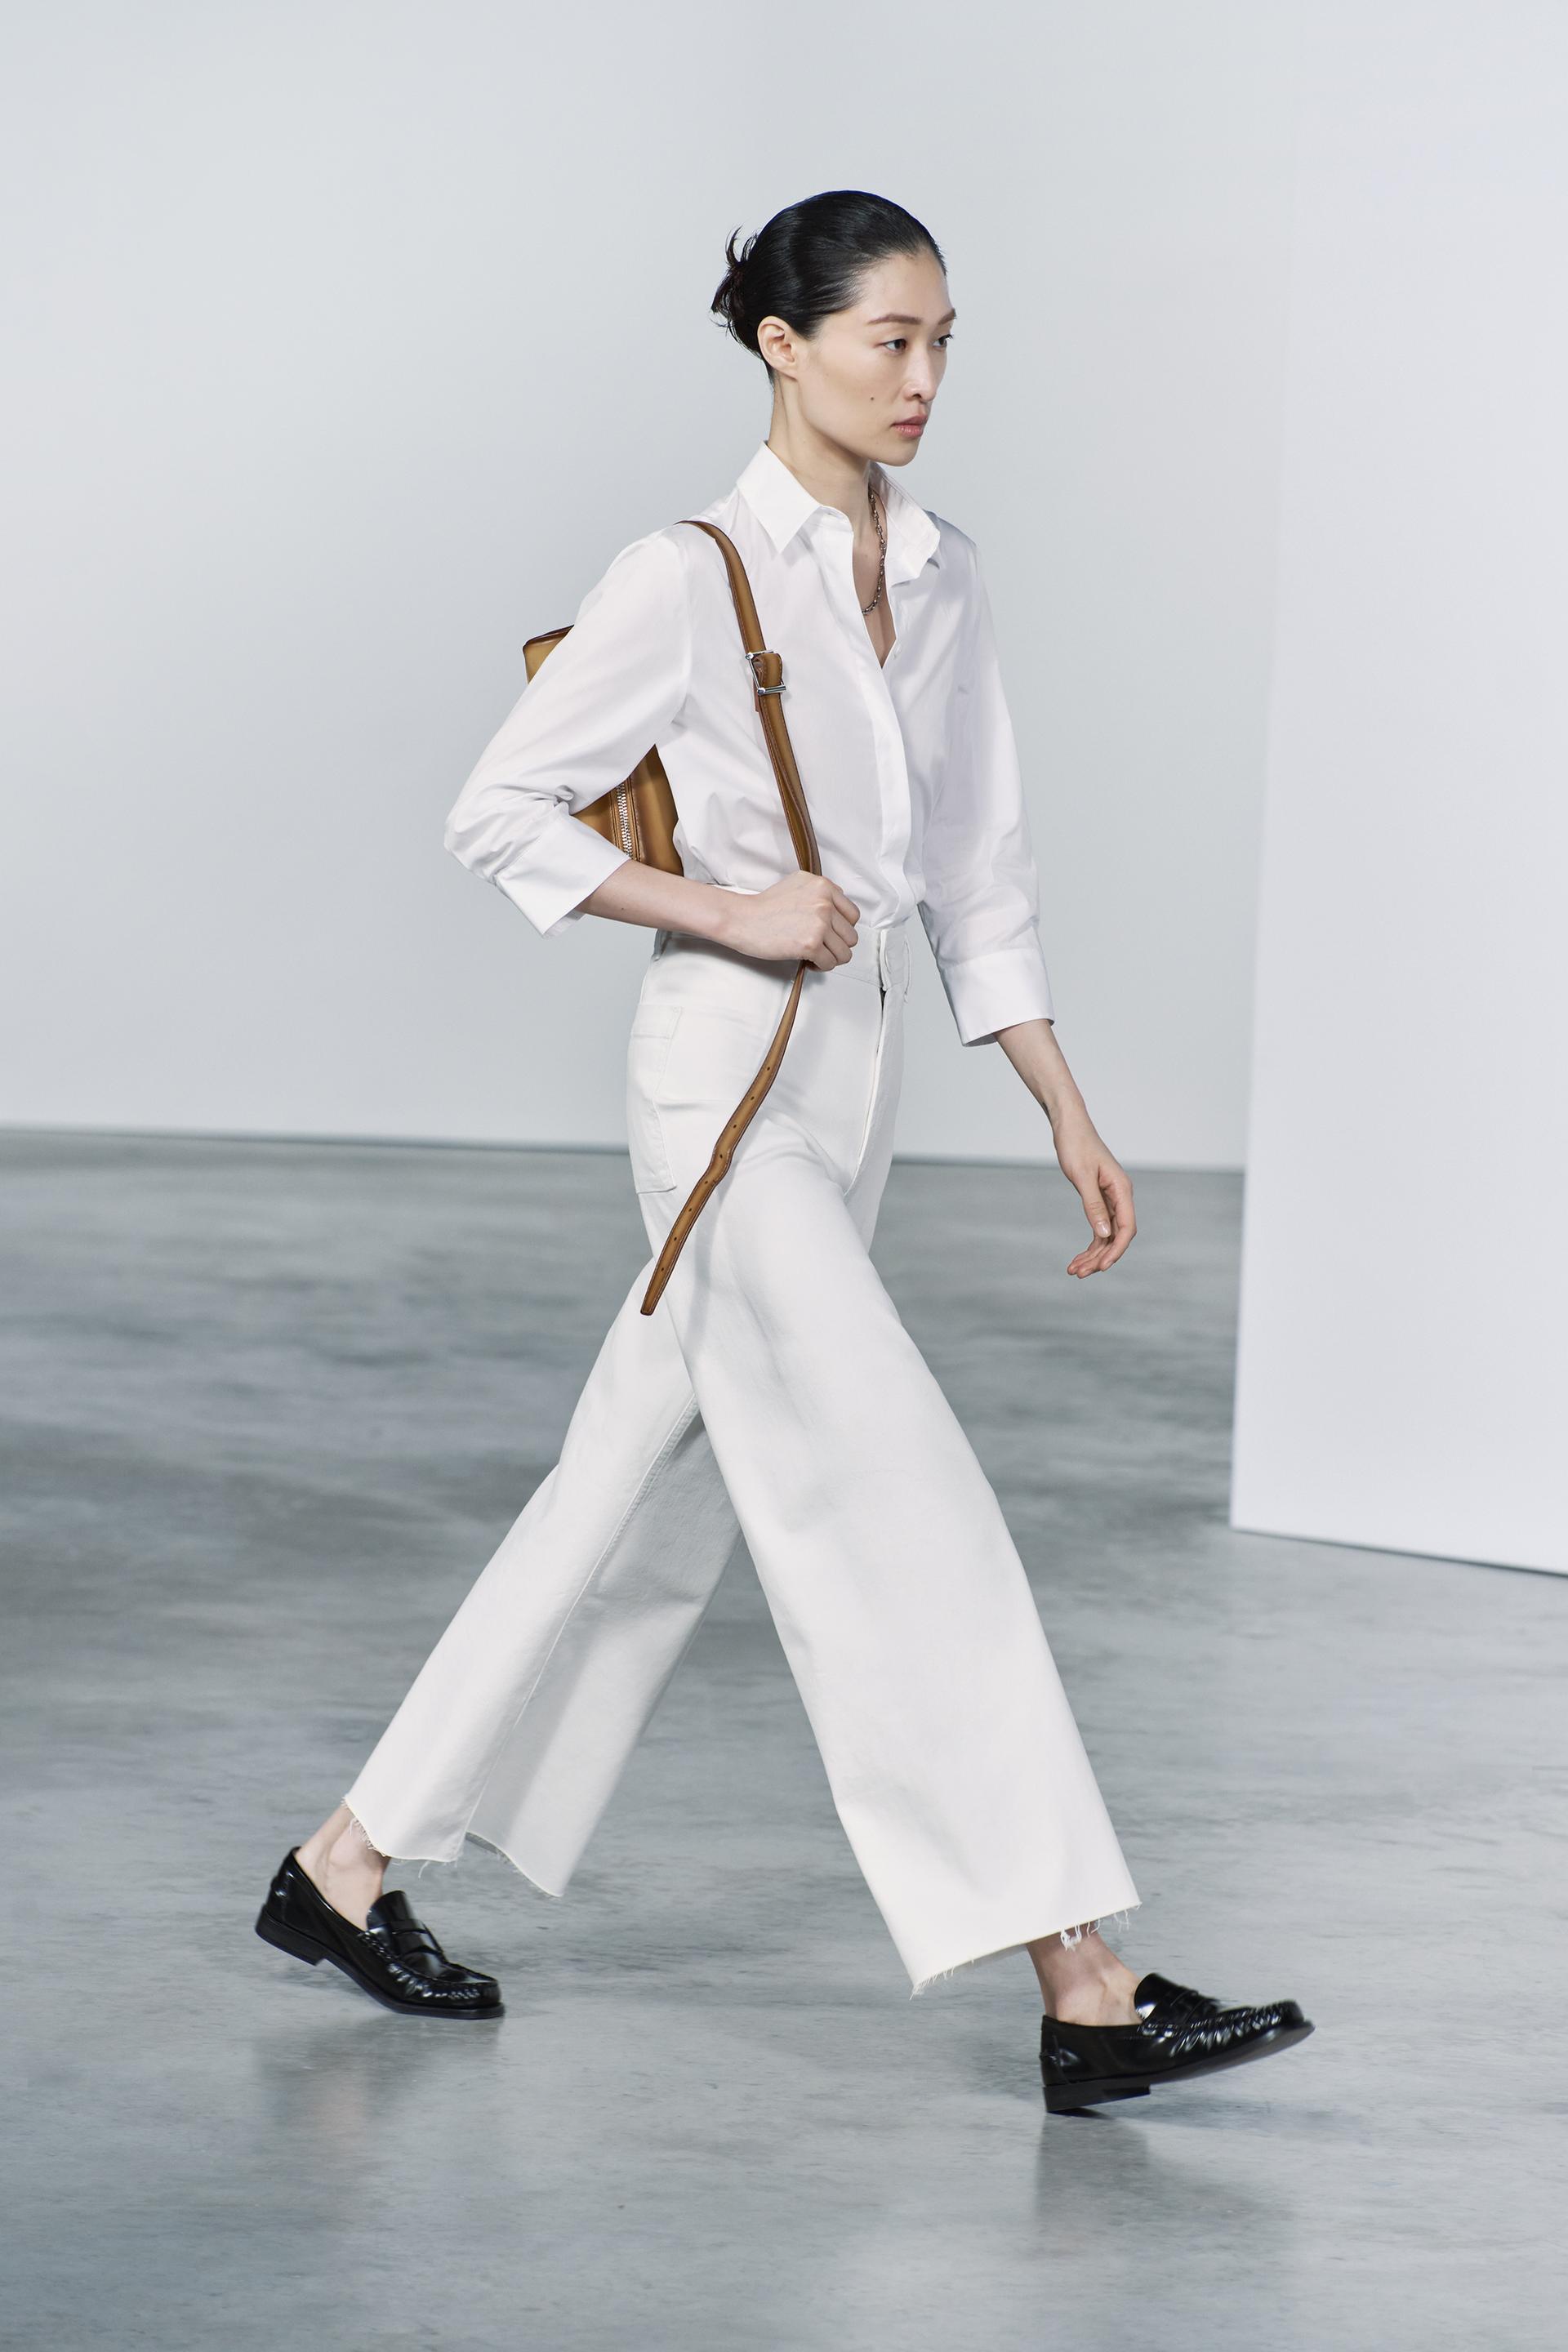 ZARA Marine White Jeans  Straight jeans outfit, White jeans